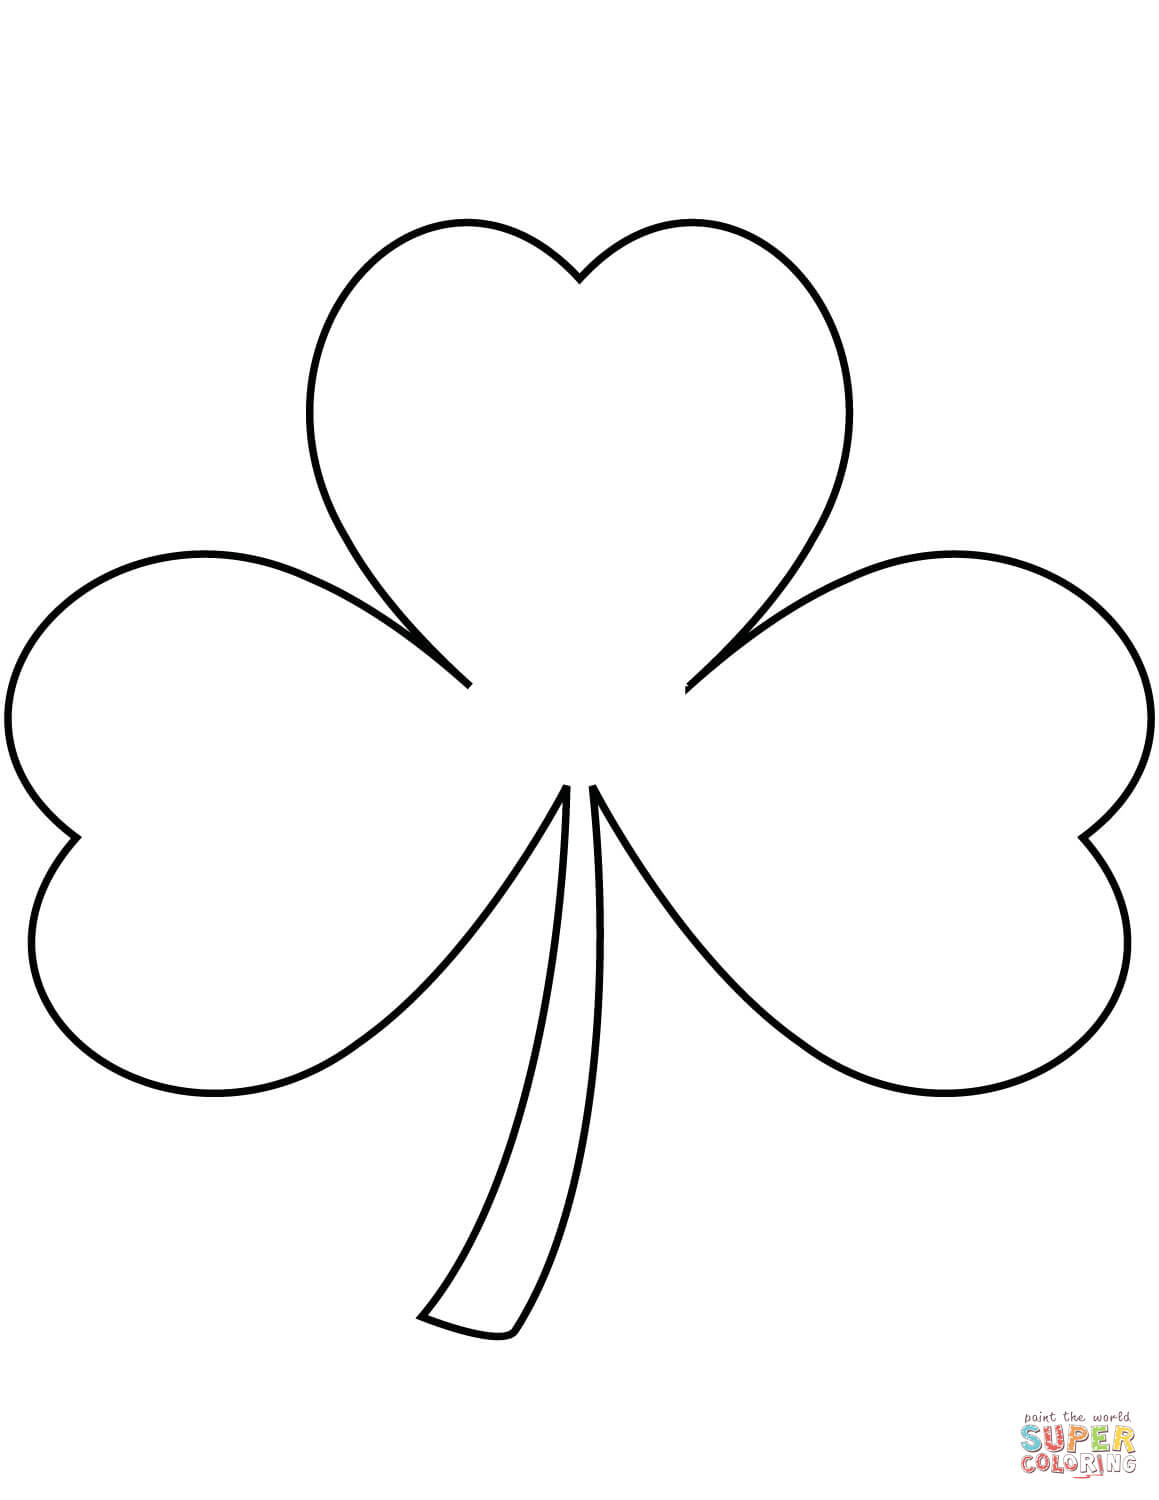 Shamrock coloring page free printable coloring pages